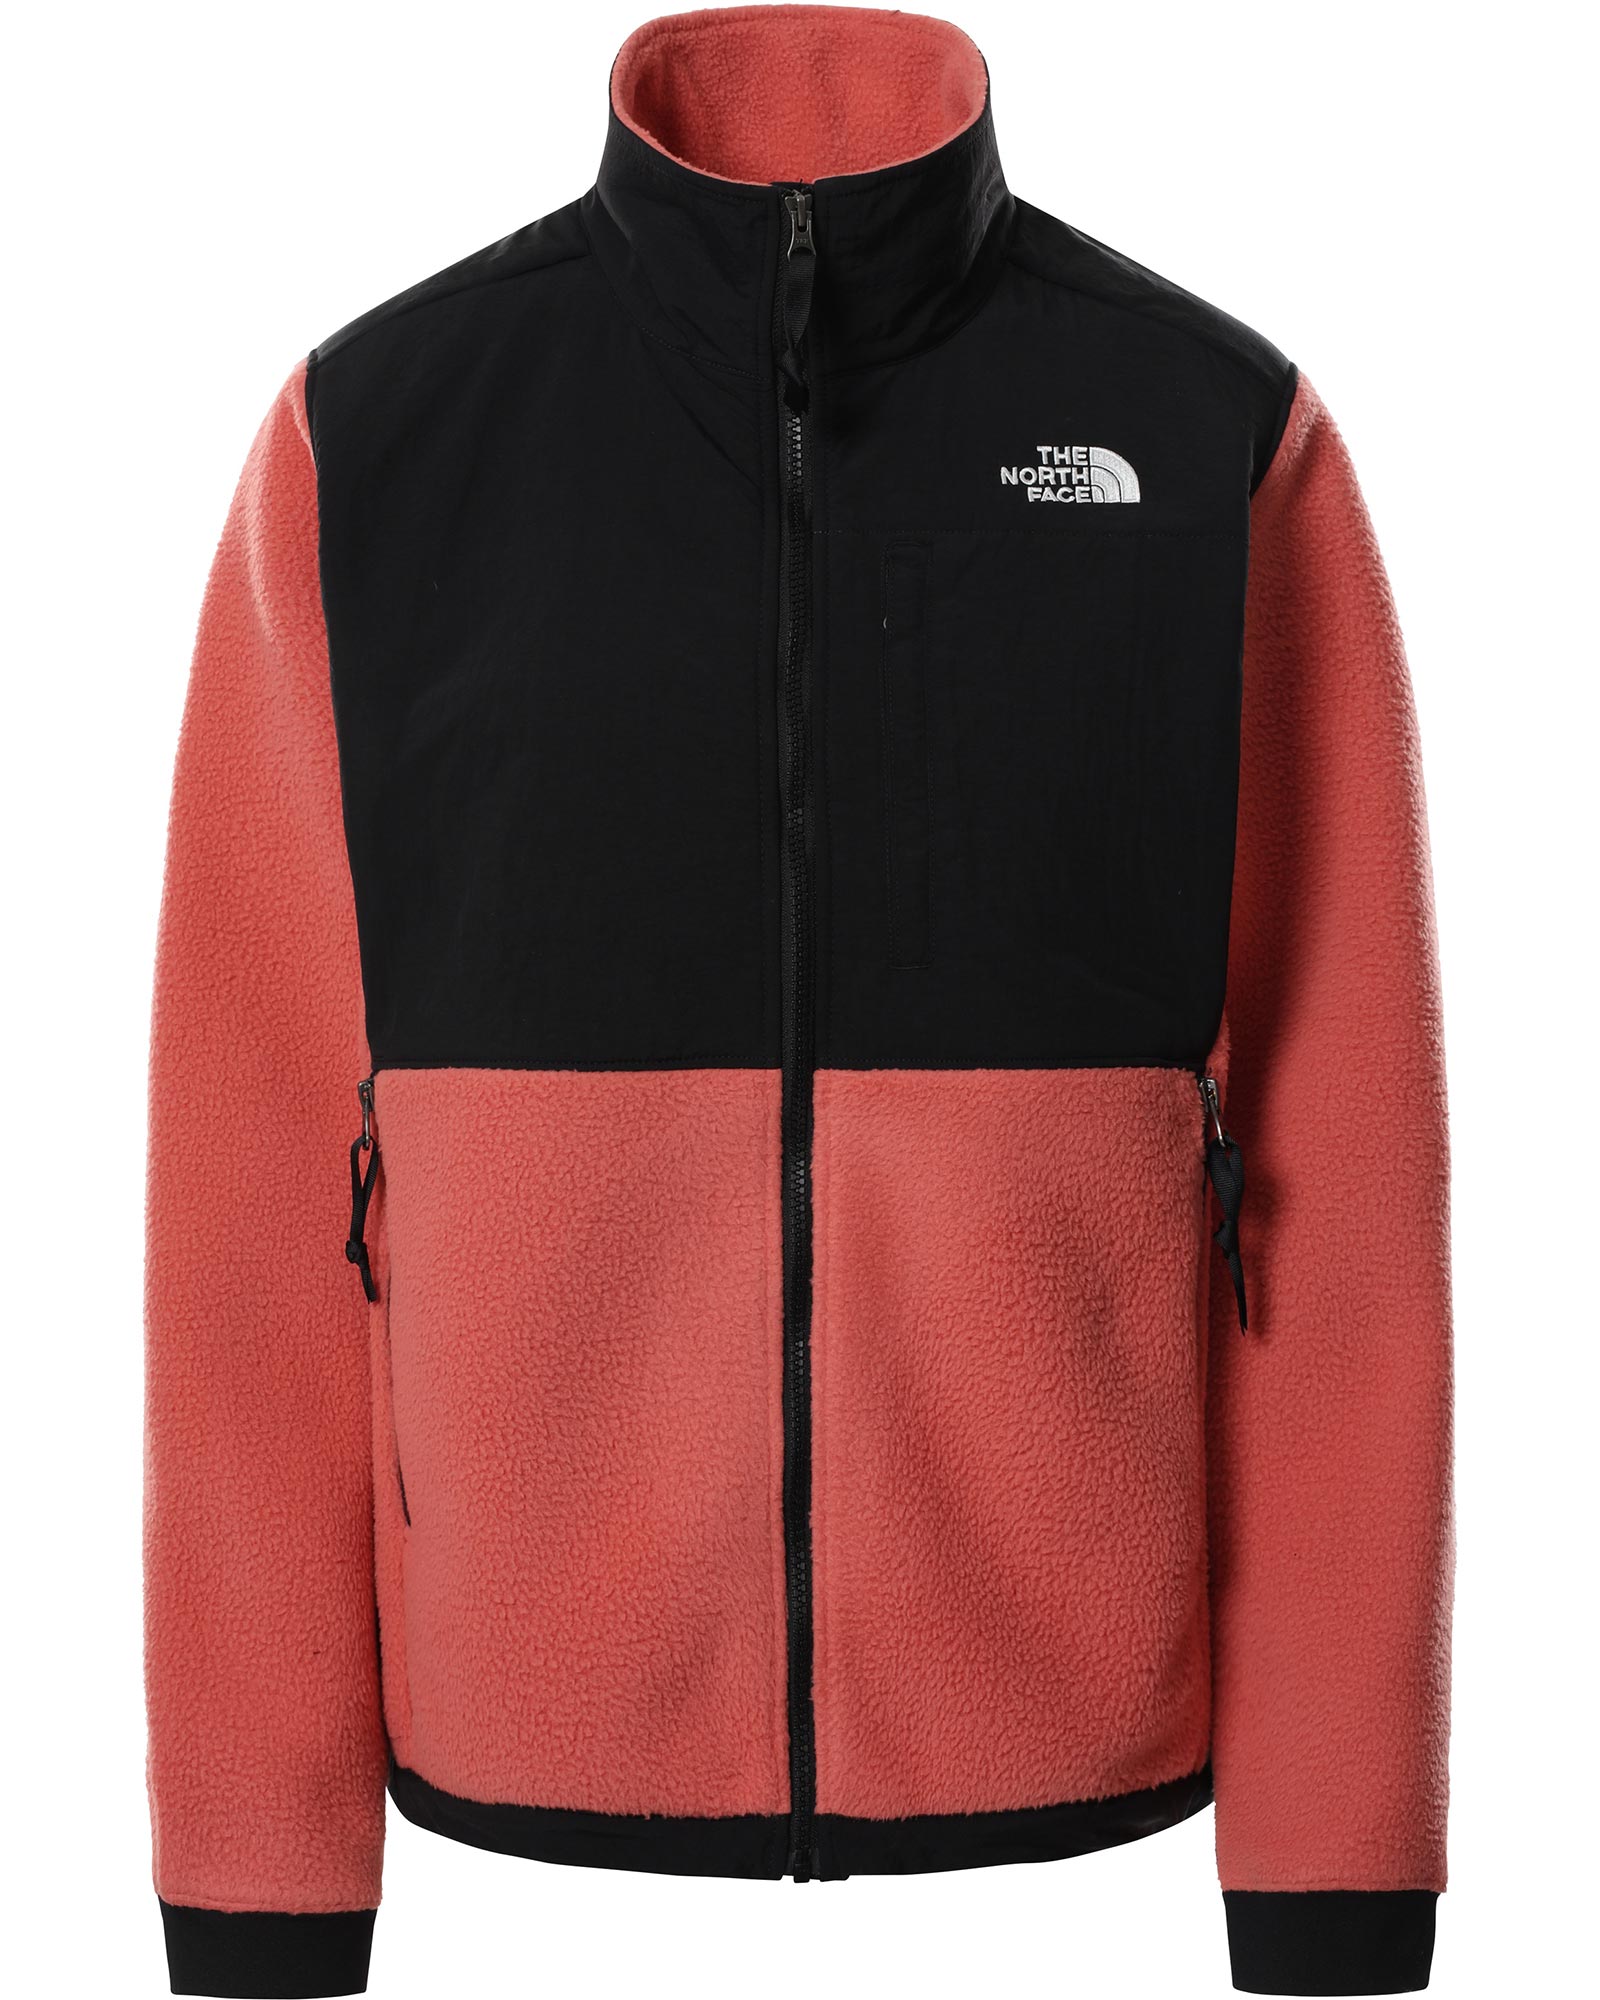 The North Face Denali 2 Women’s Jacket - Faded Rose S